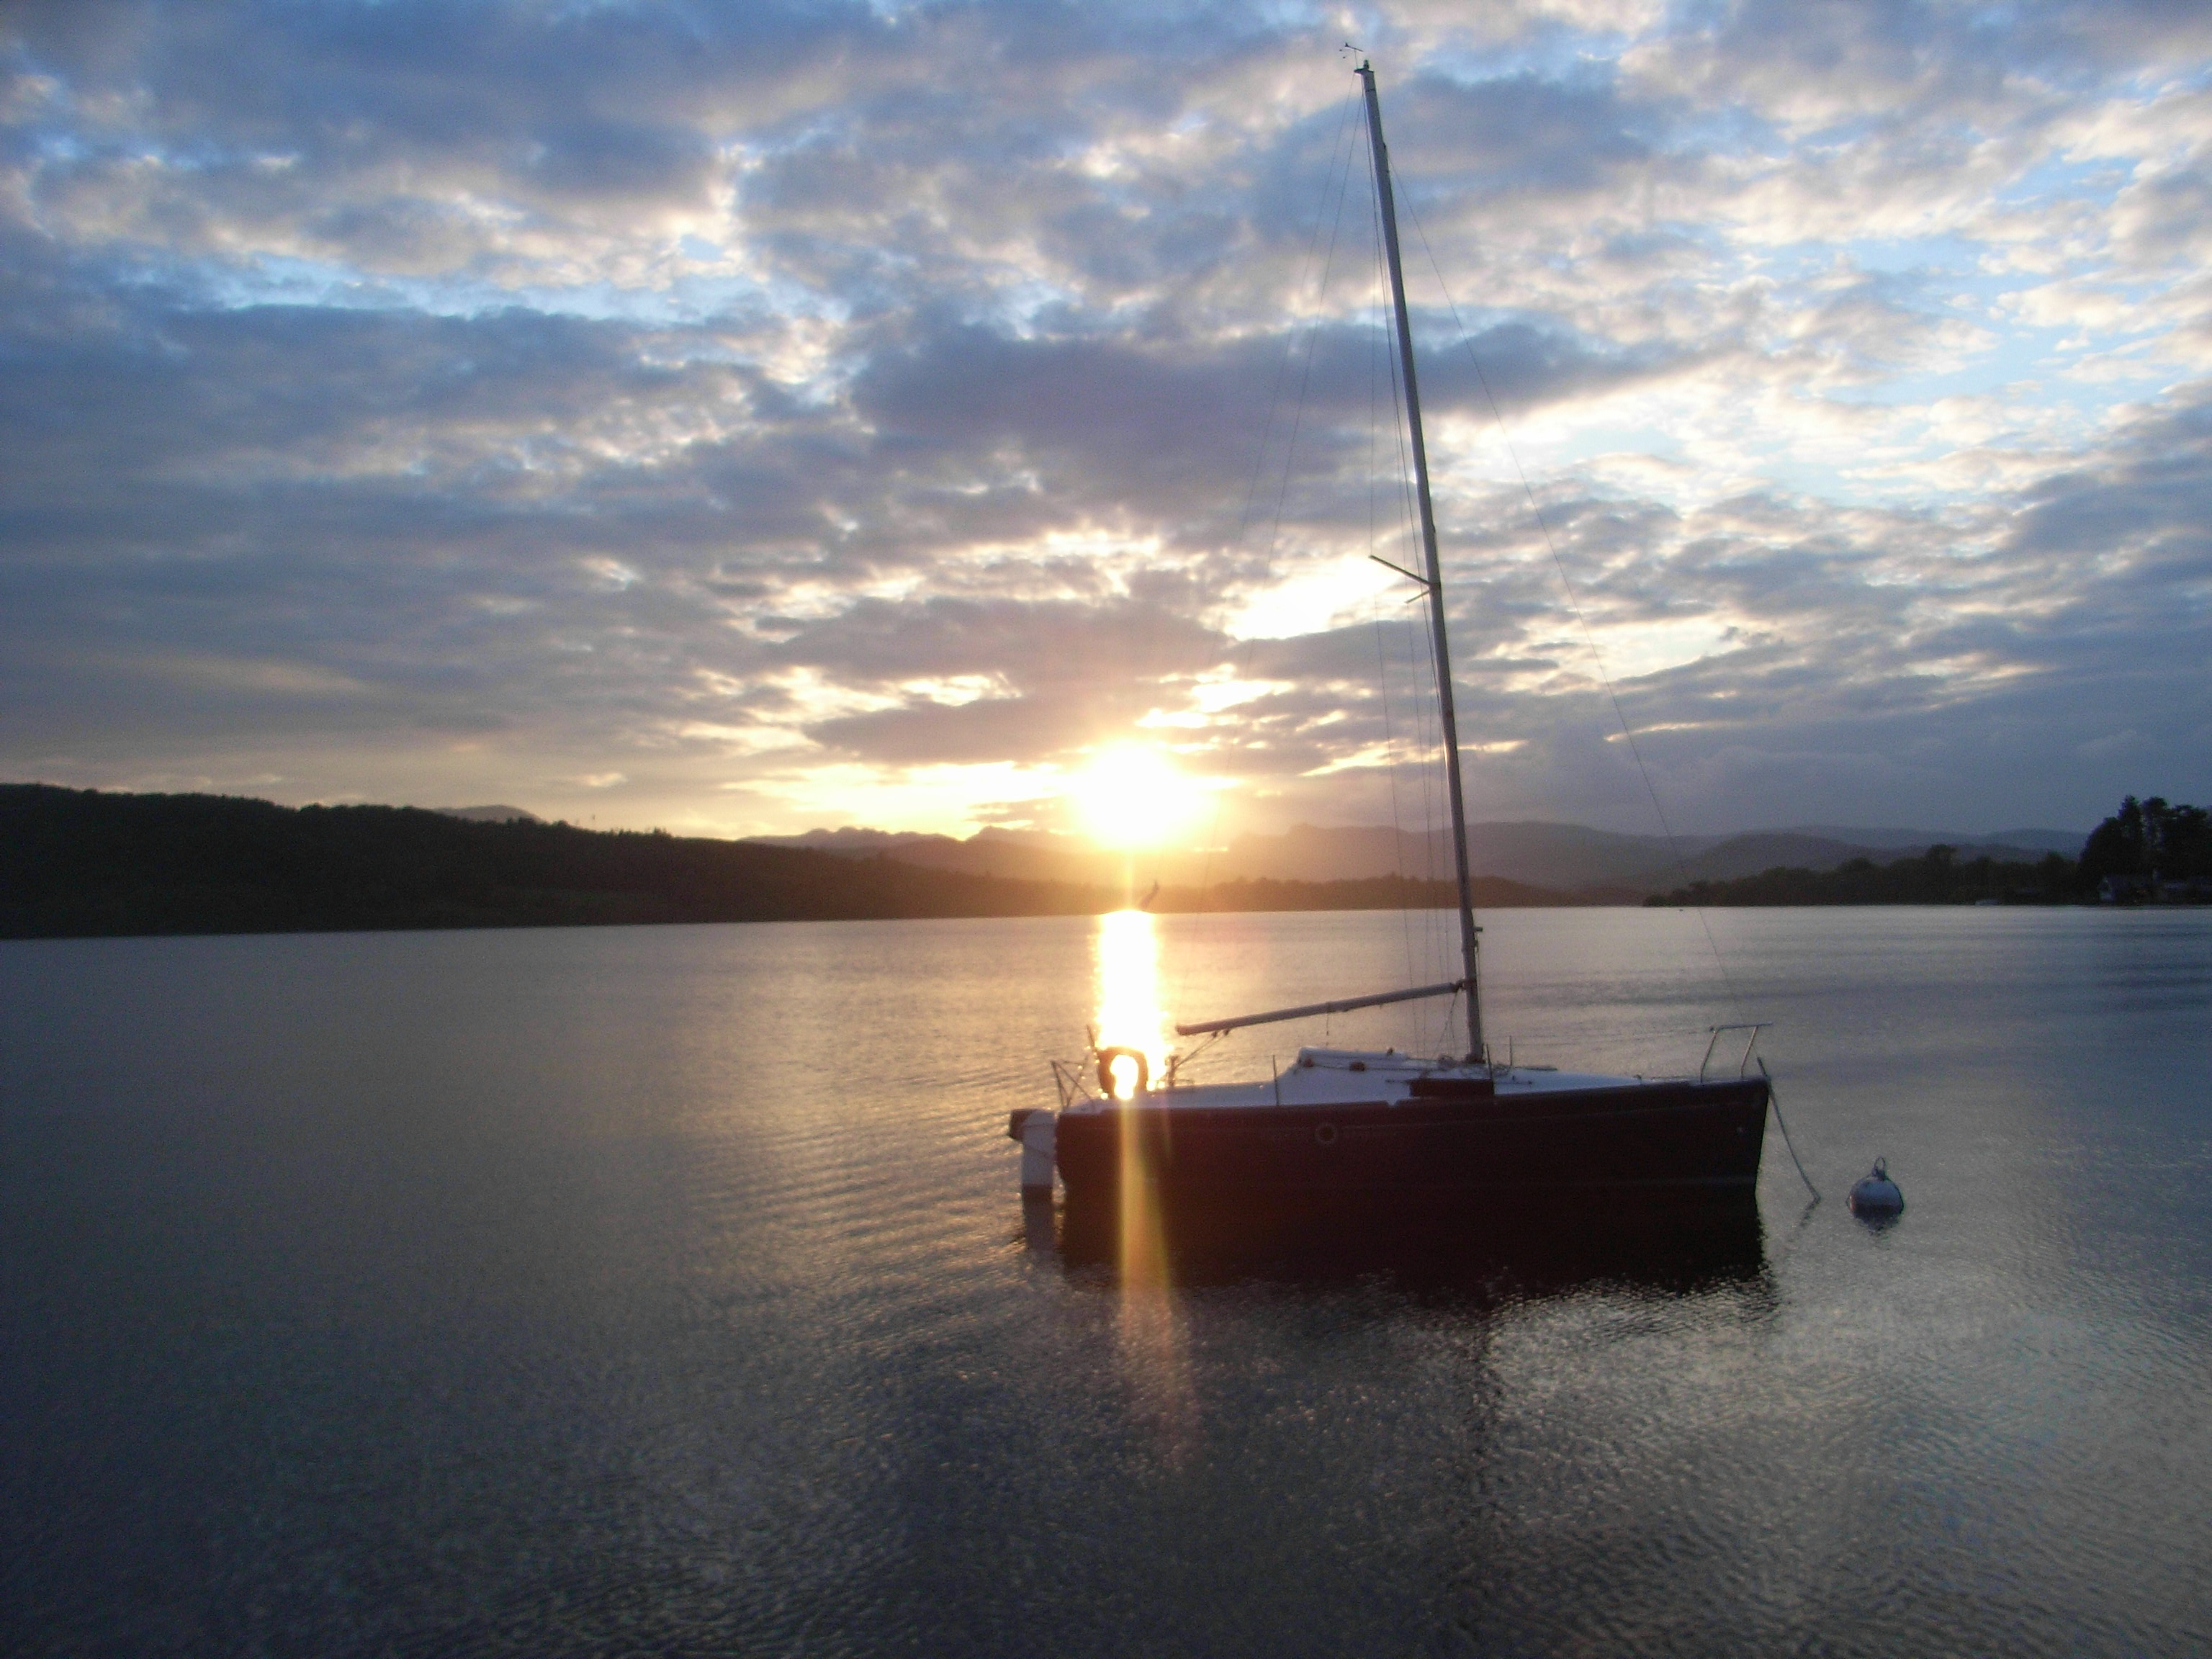 A yacht in the calm waters of Lake Windermere